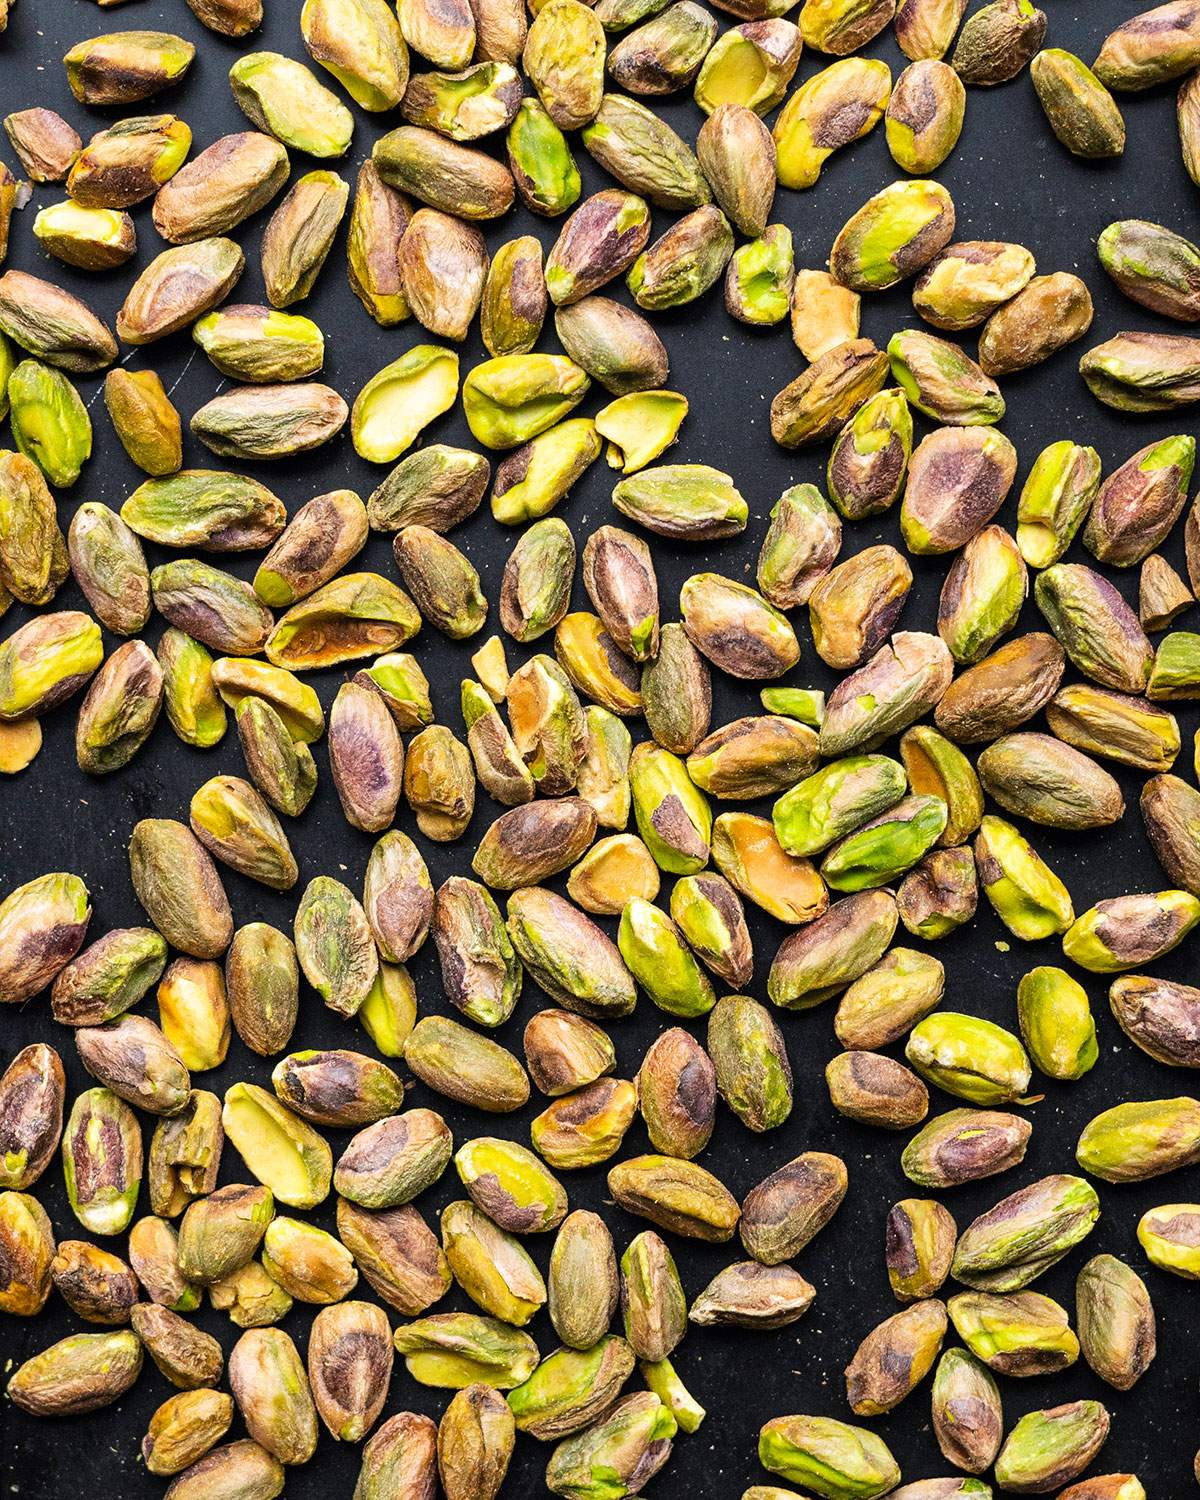 Roasted pistachios up close on a roasting tray.